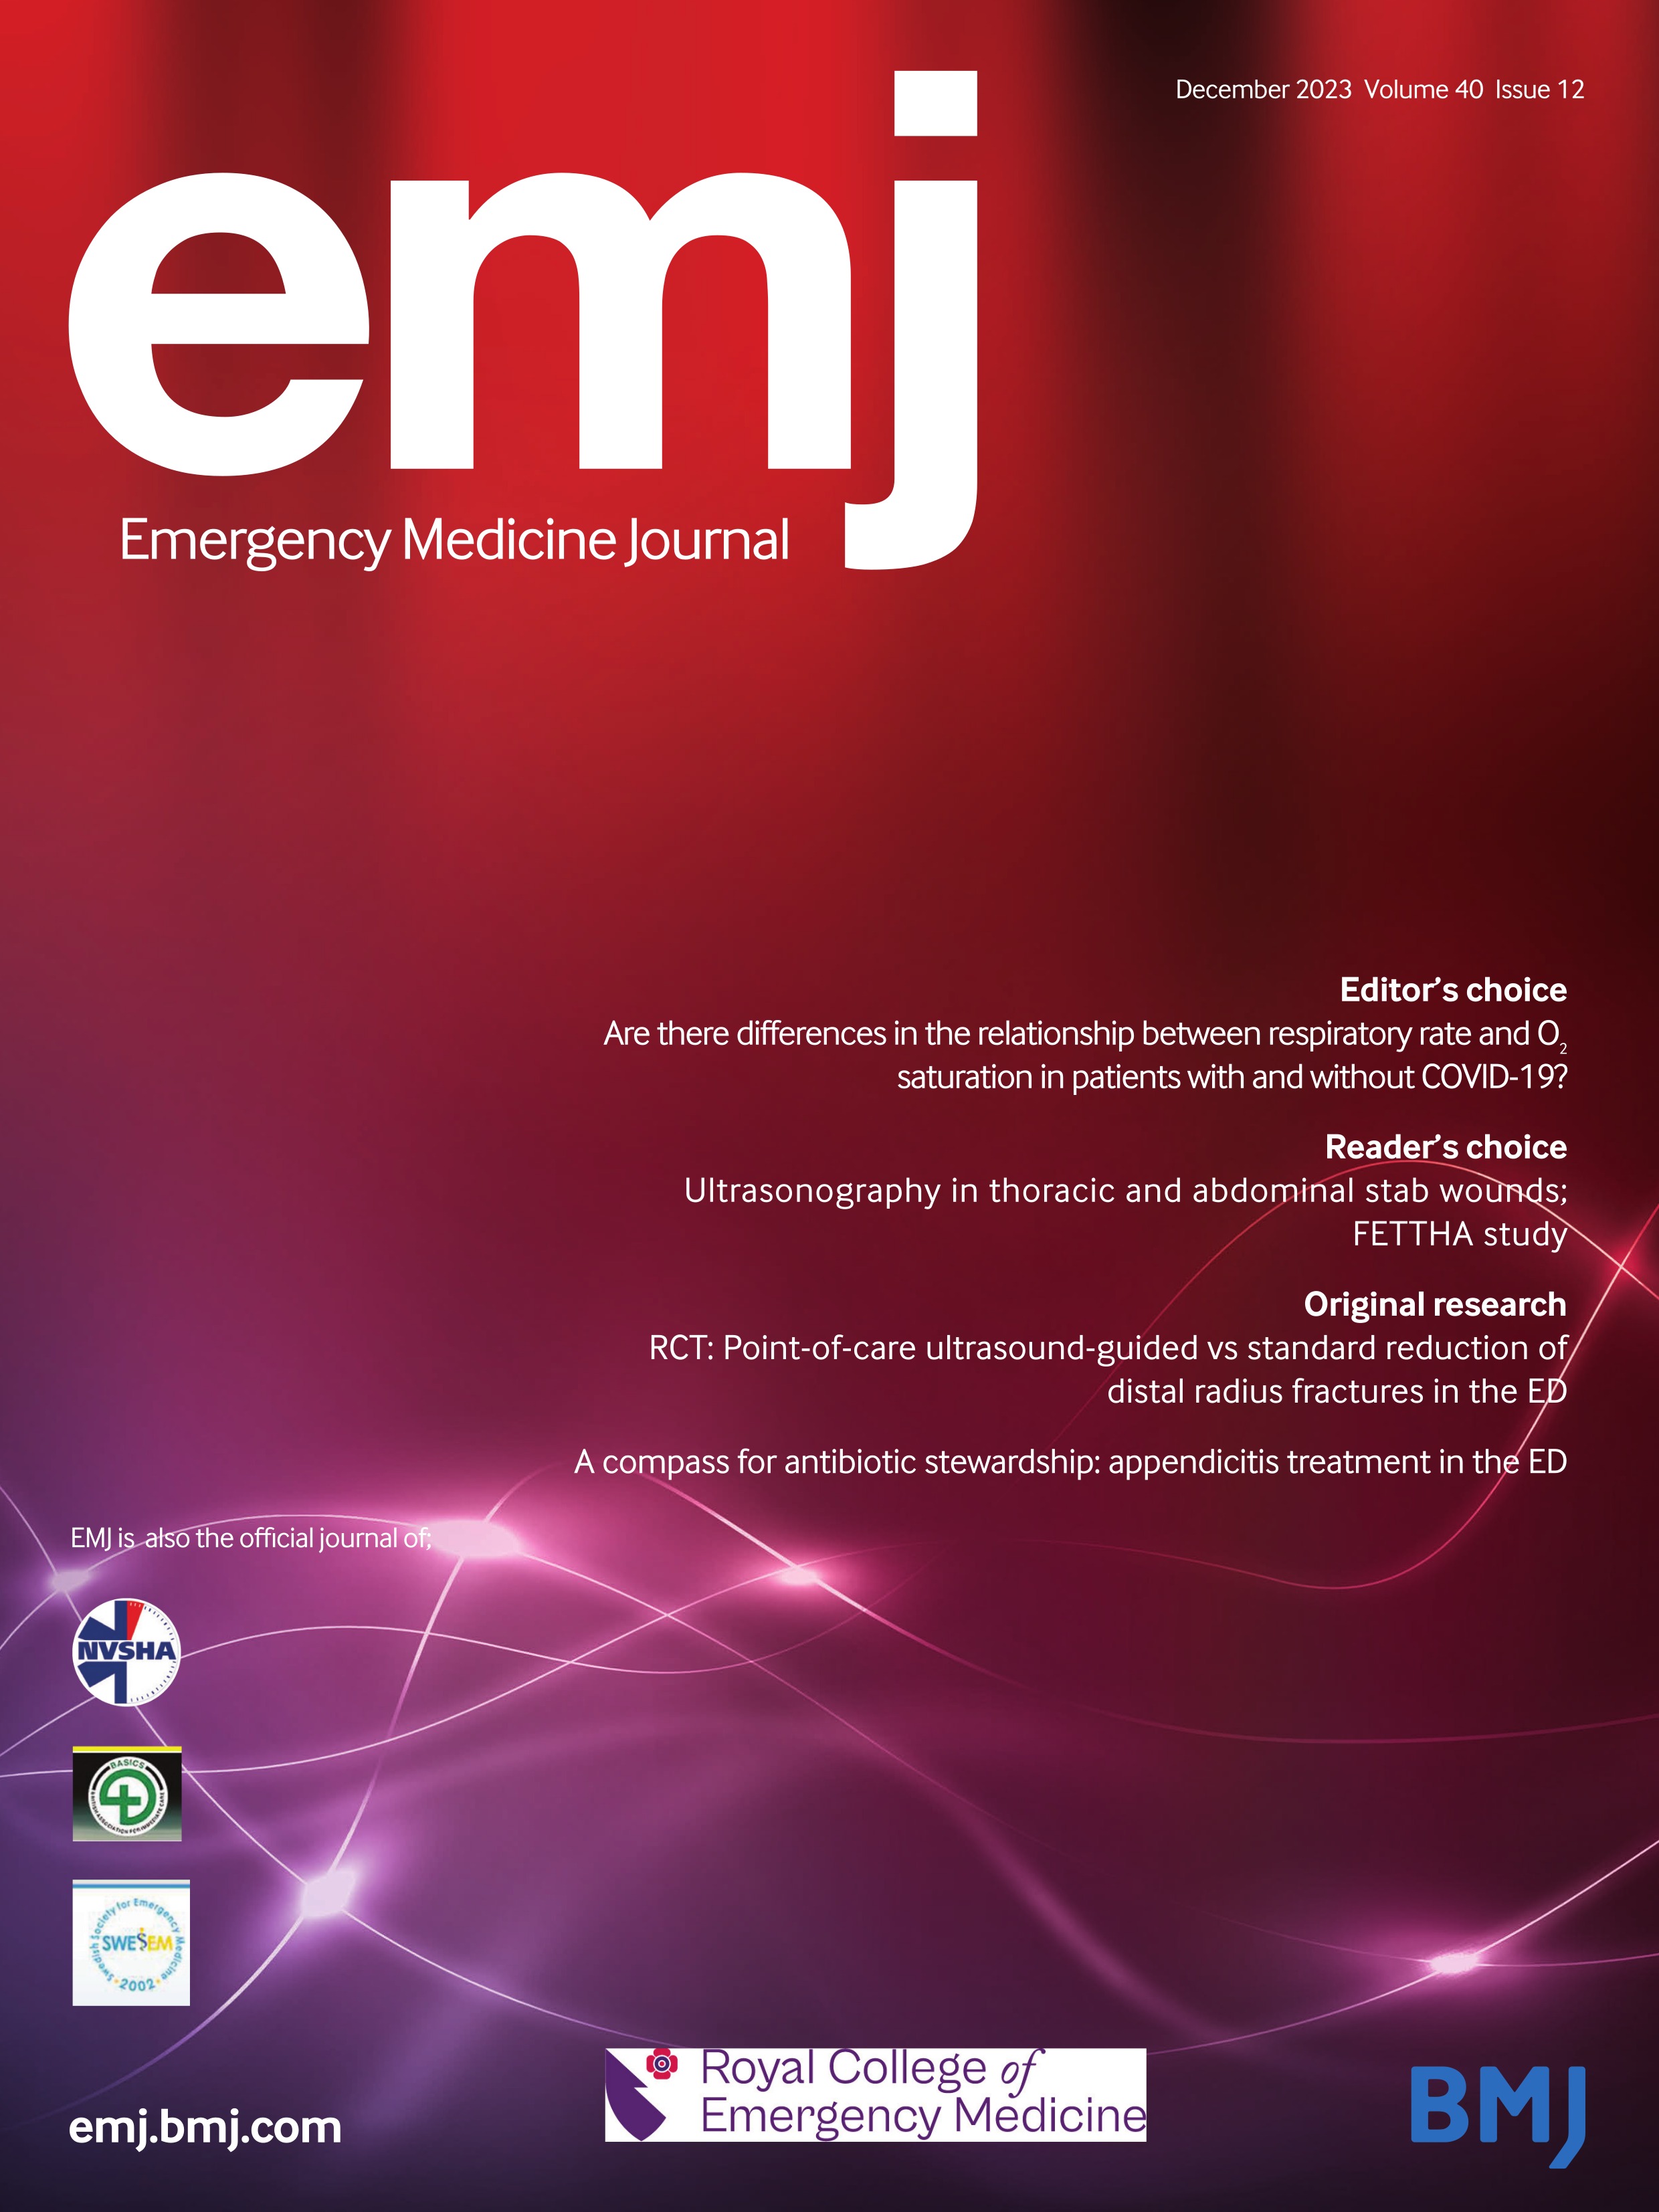 Developing an implementation intervention for managing acute vertigo in the emergency department